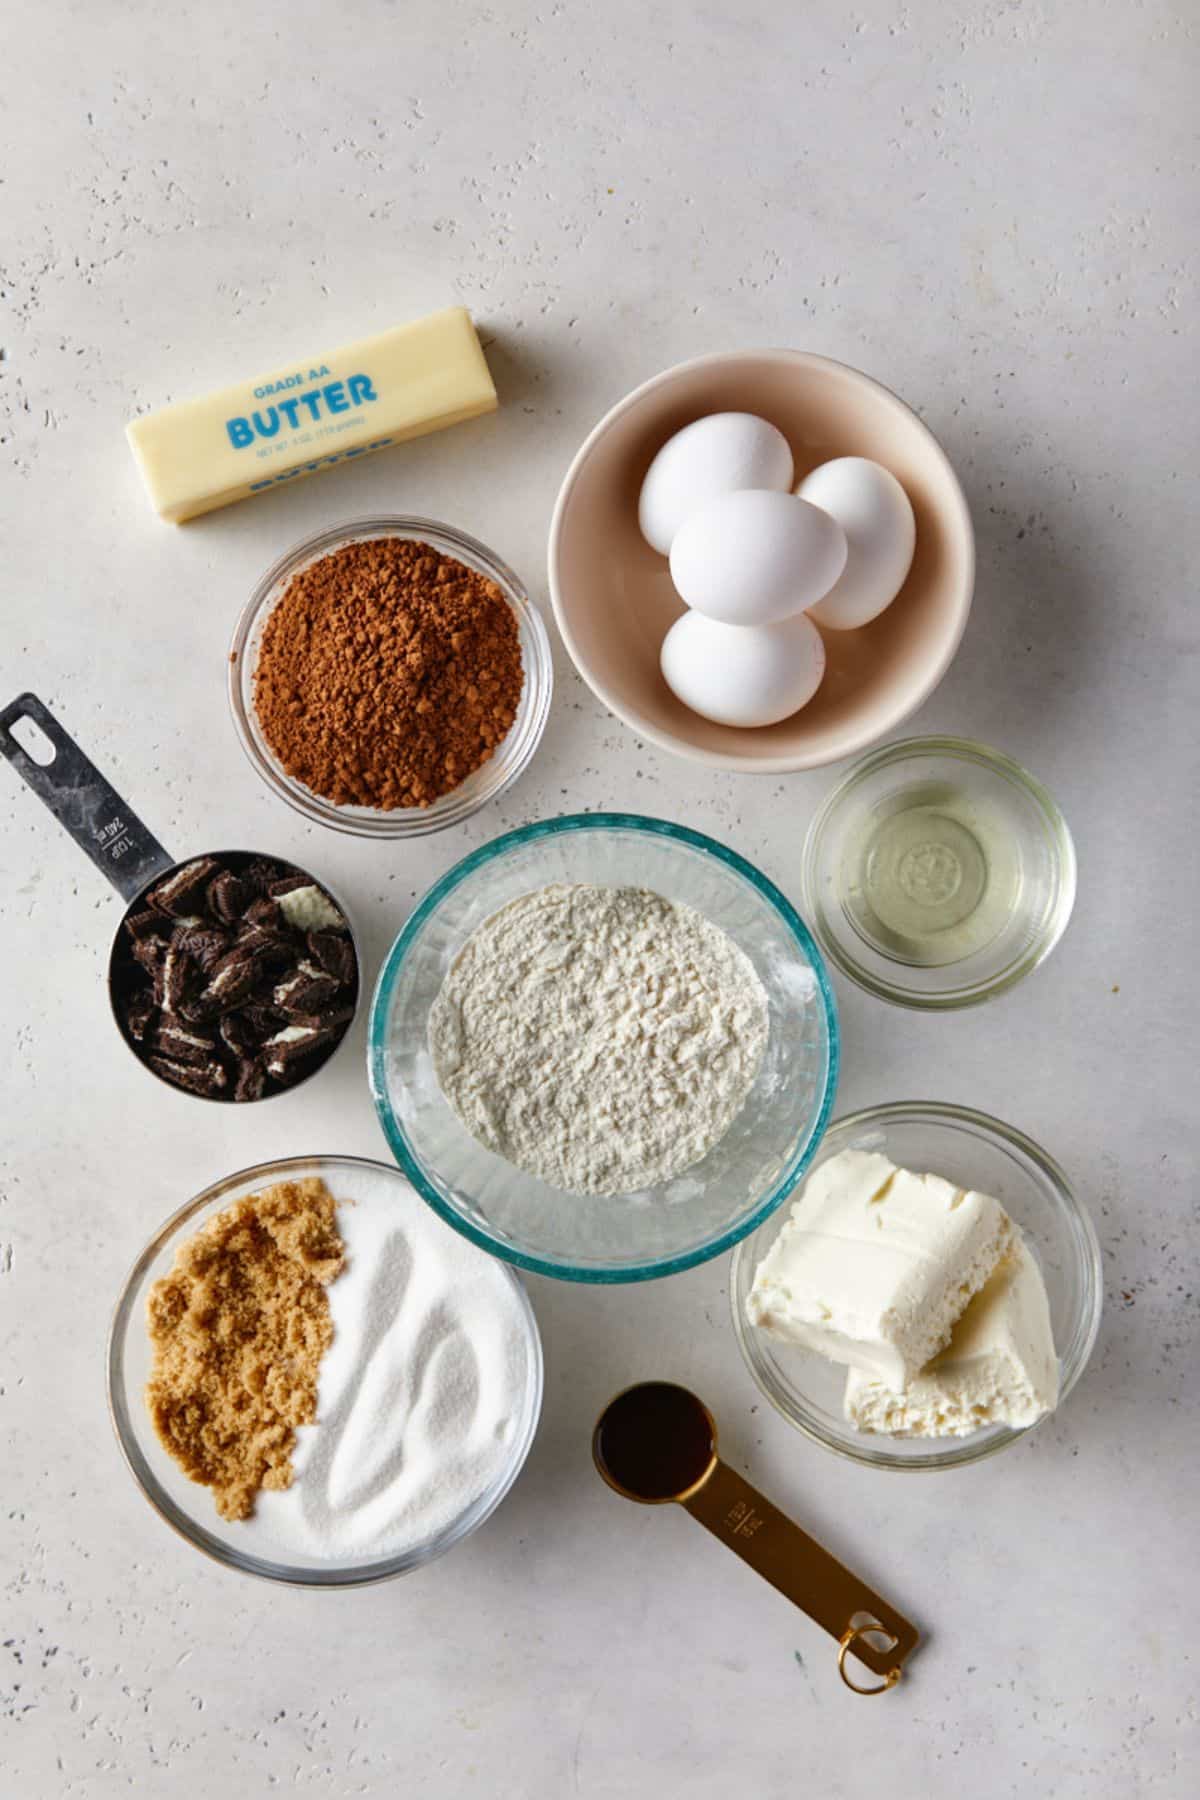 Ingredients to make oreo bars on the counter before mixing together.